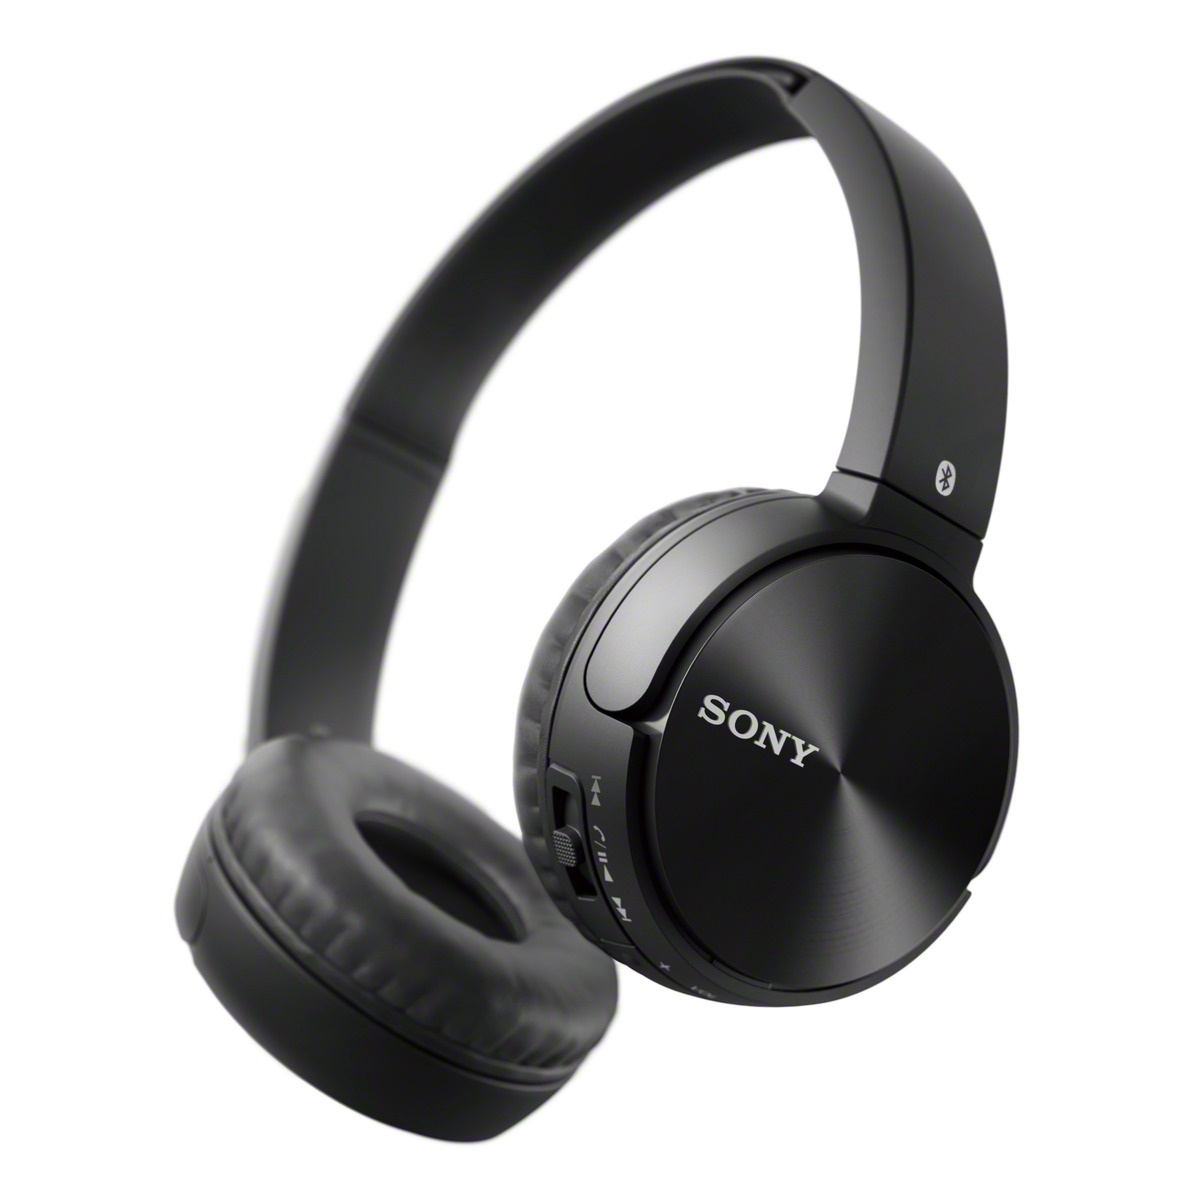 wired - headphones with 3.5 mic - - Series Sony - white mm jack MDR-ZX310AP full ZX - size -